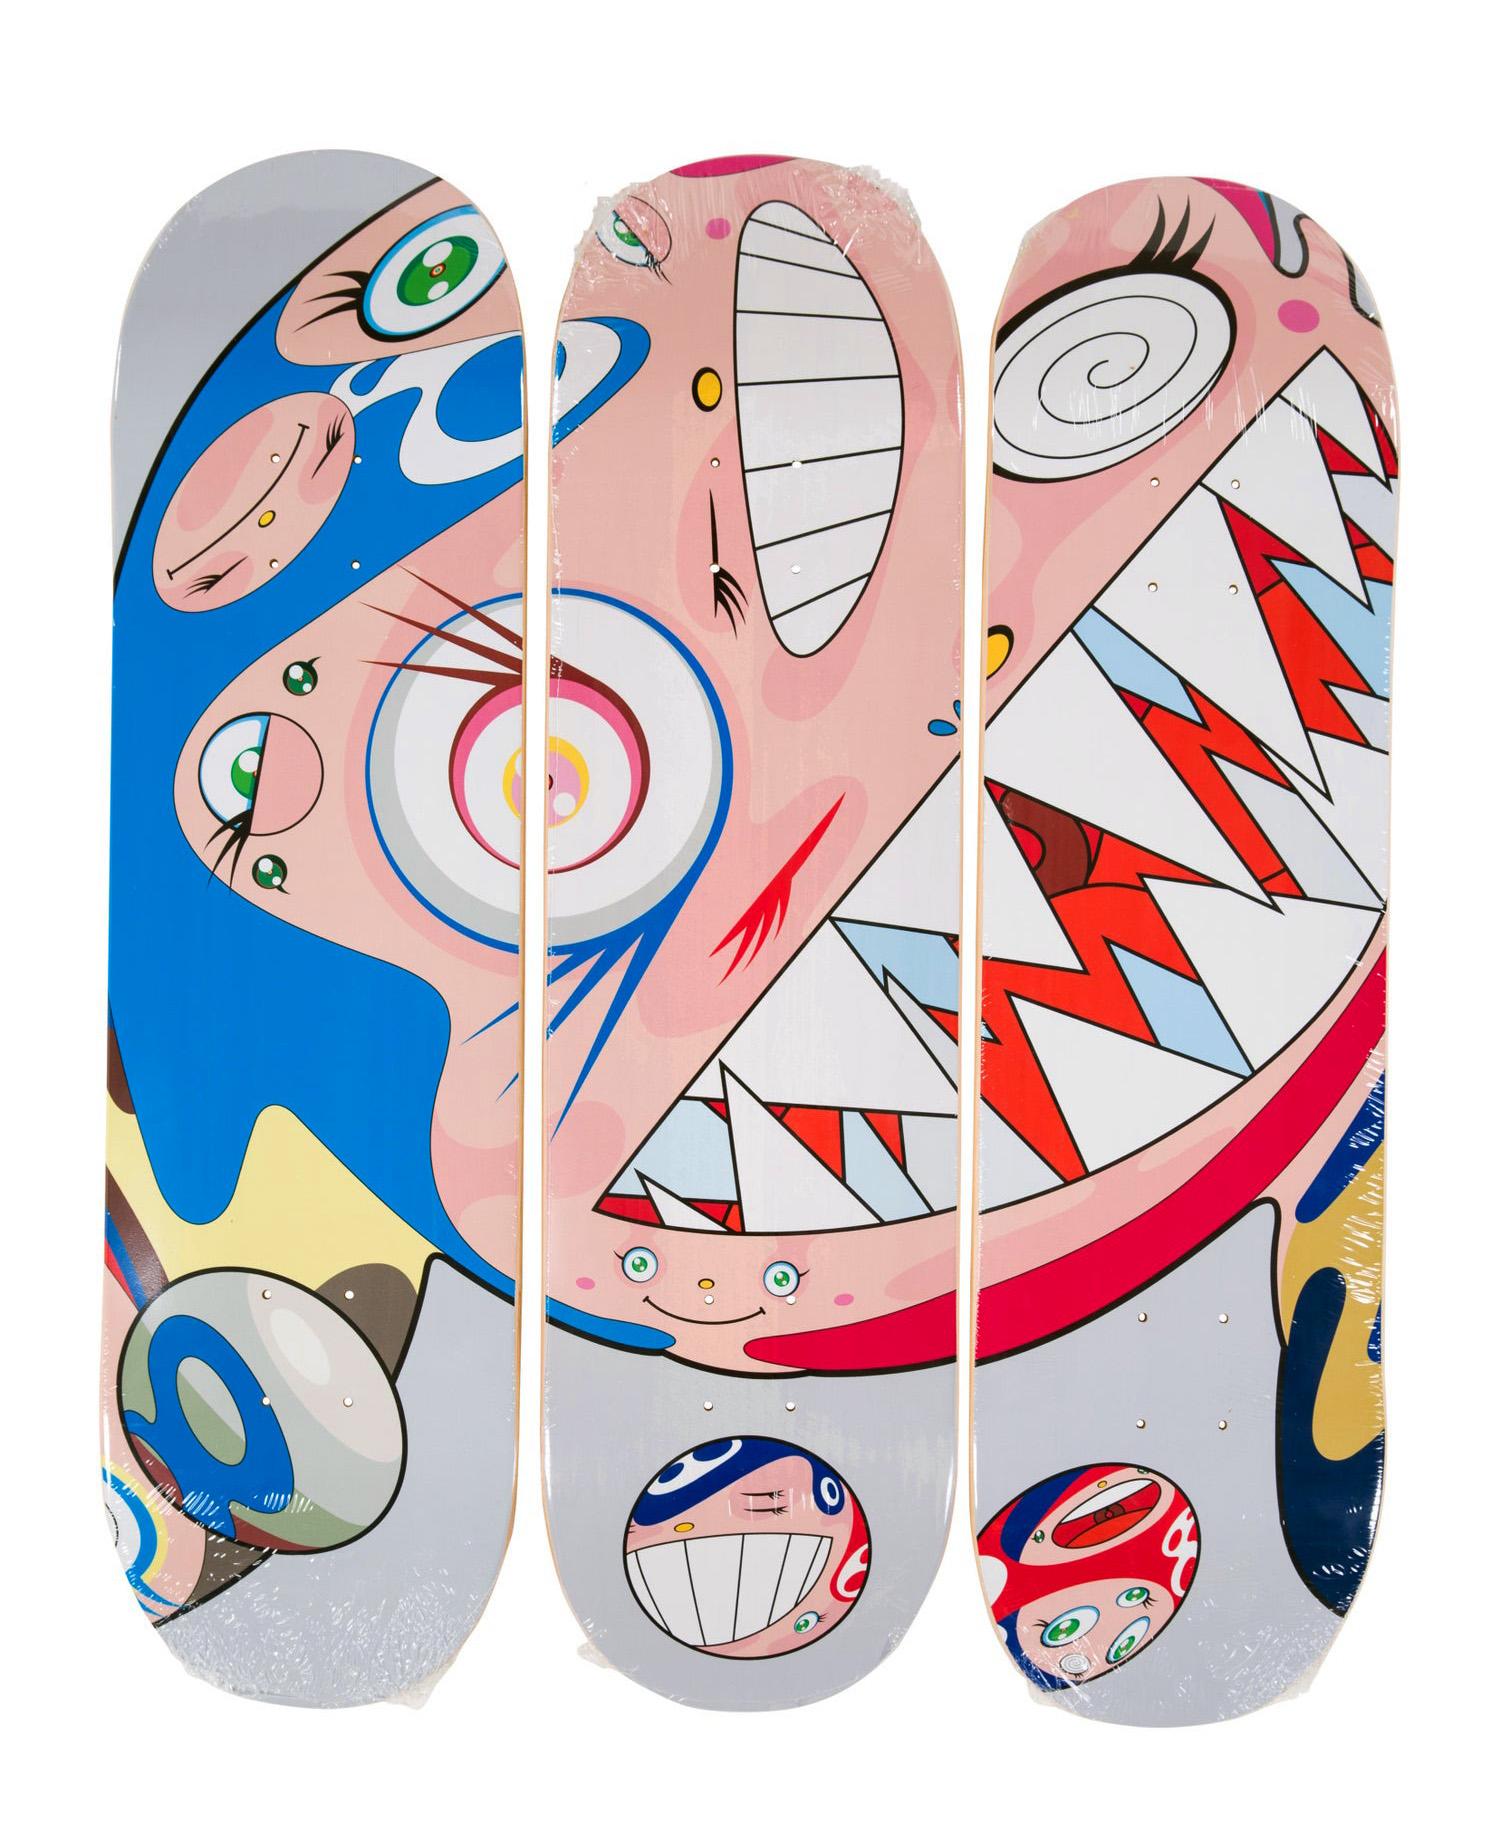 Takashi Murakami DOB Skateboard Deck Triptych 2018:
A highly decorative Takashi Murakami skateboard set/triptych that makes for vibrant one of a kind wall-art that hangs with ease. The works feature Takashi Murakami’s Mr. DOB figure spread across